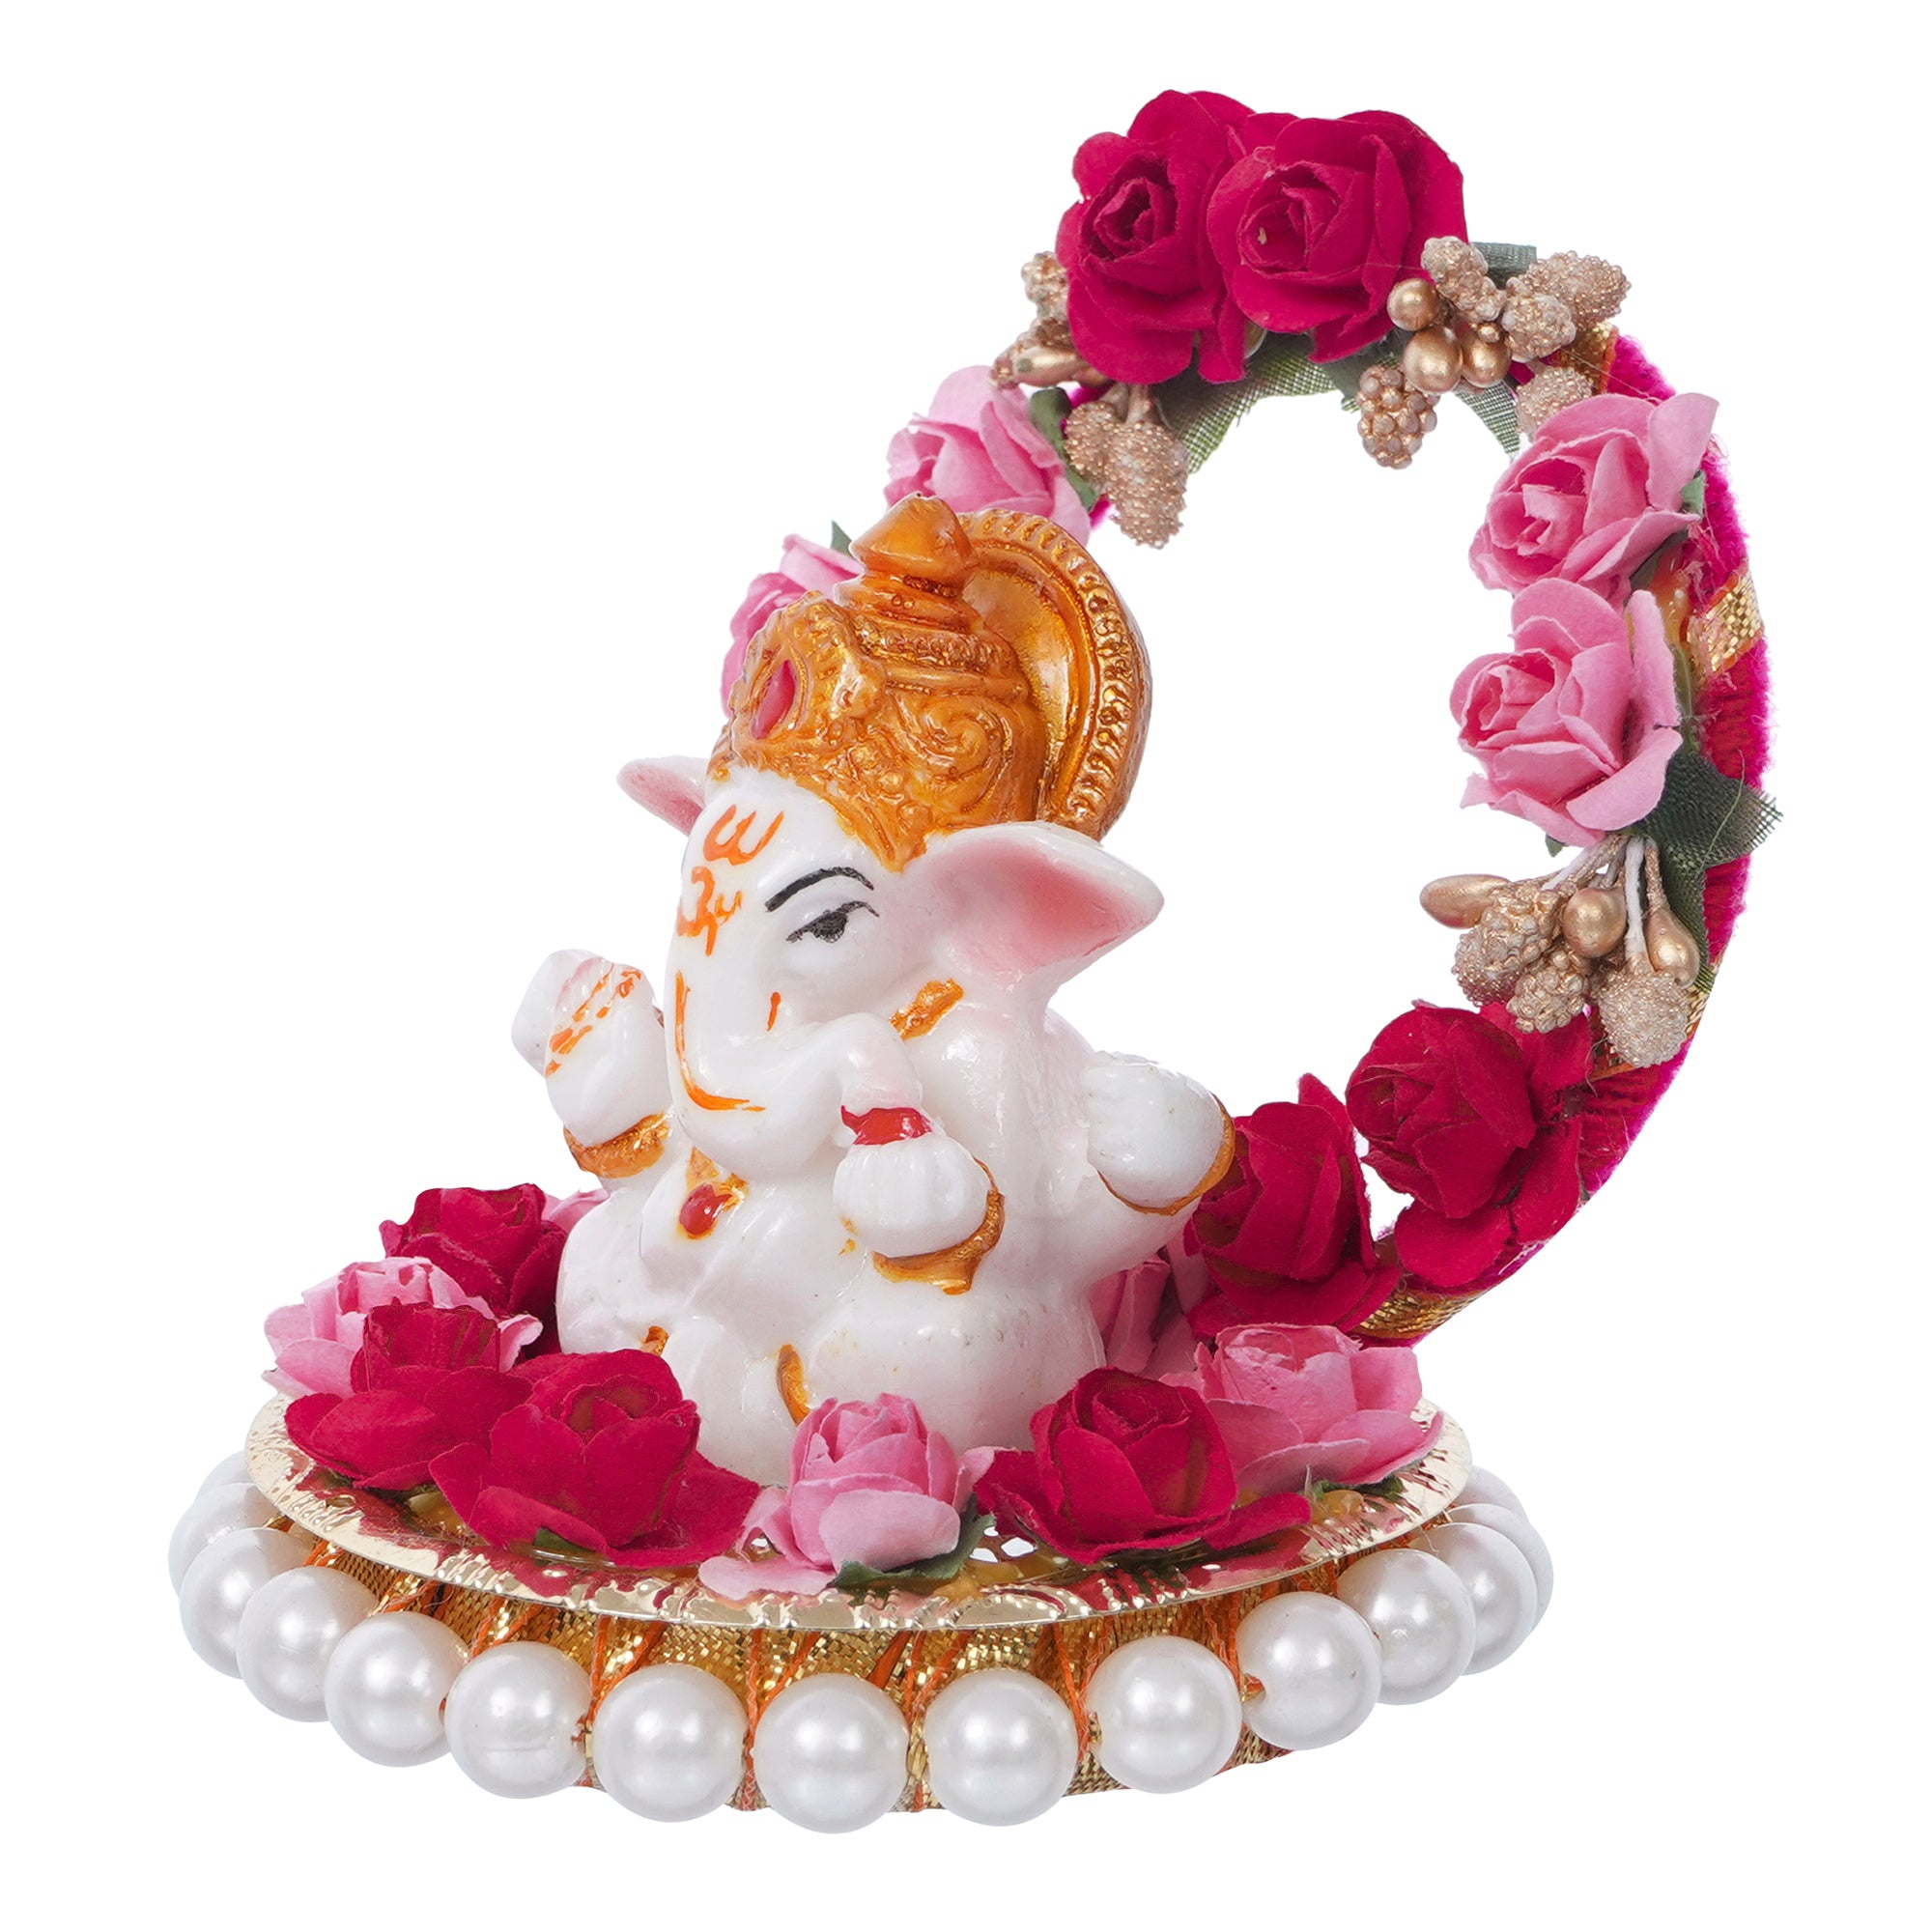 Polyresin Lord Ganesha Idol on Decorative Handcrafted Plate with Throne of Pink and Red Flowers 5